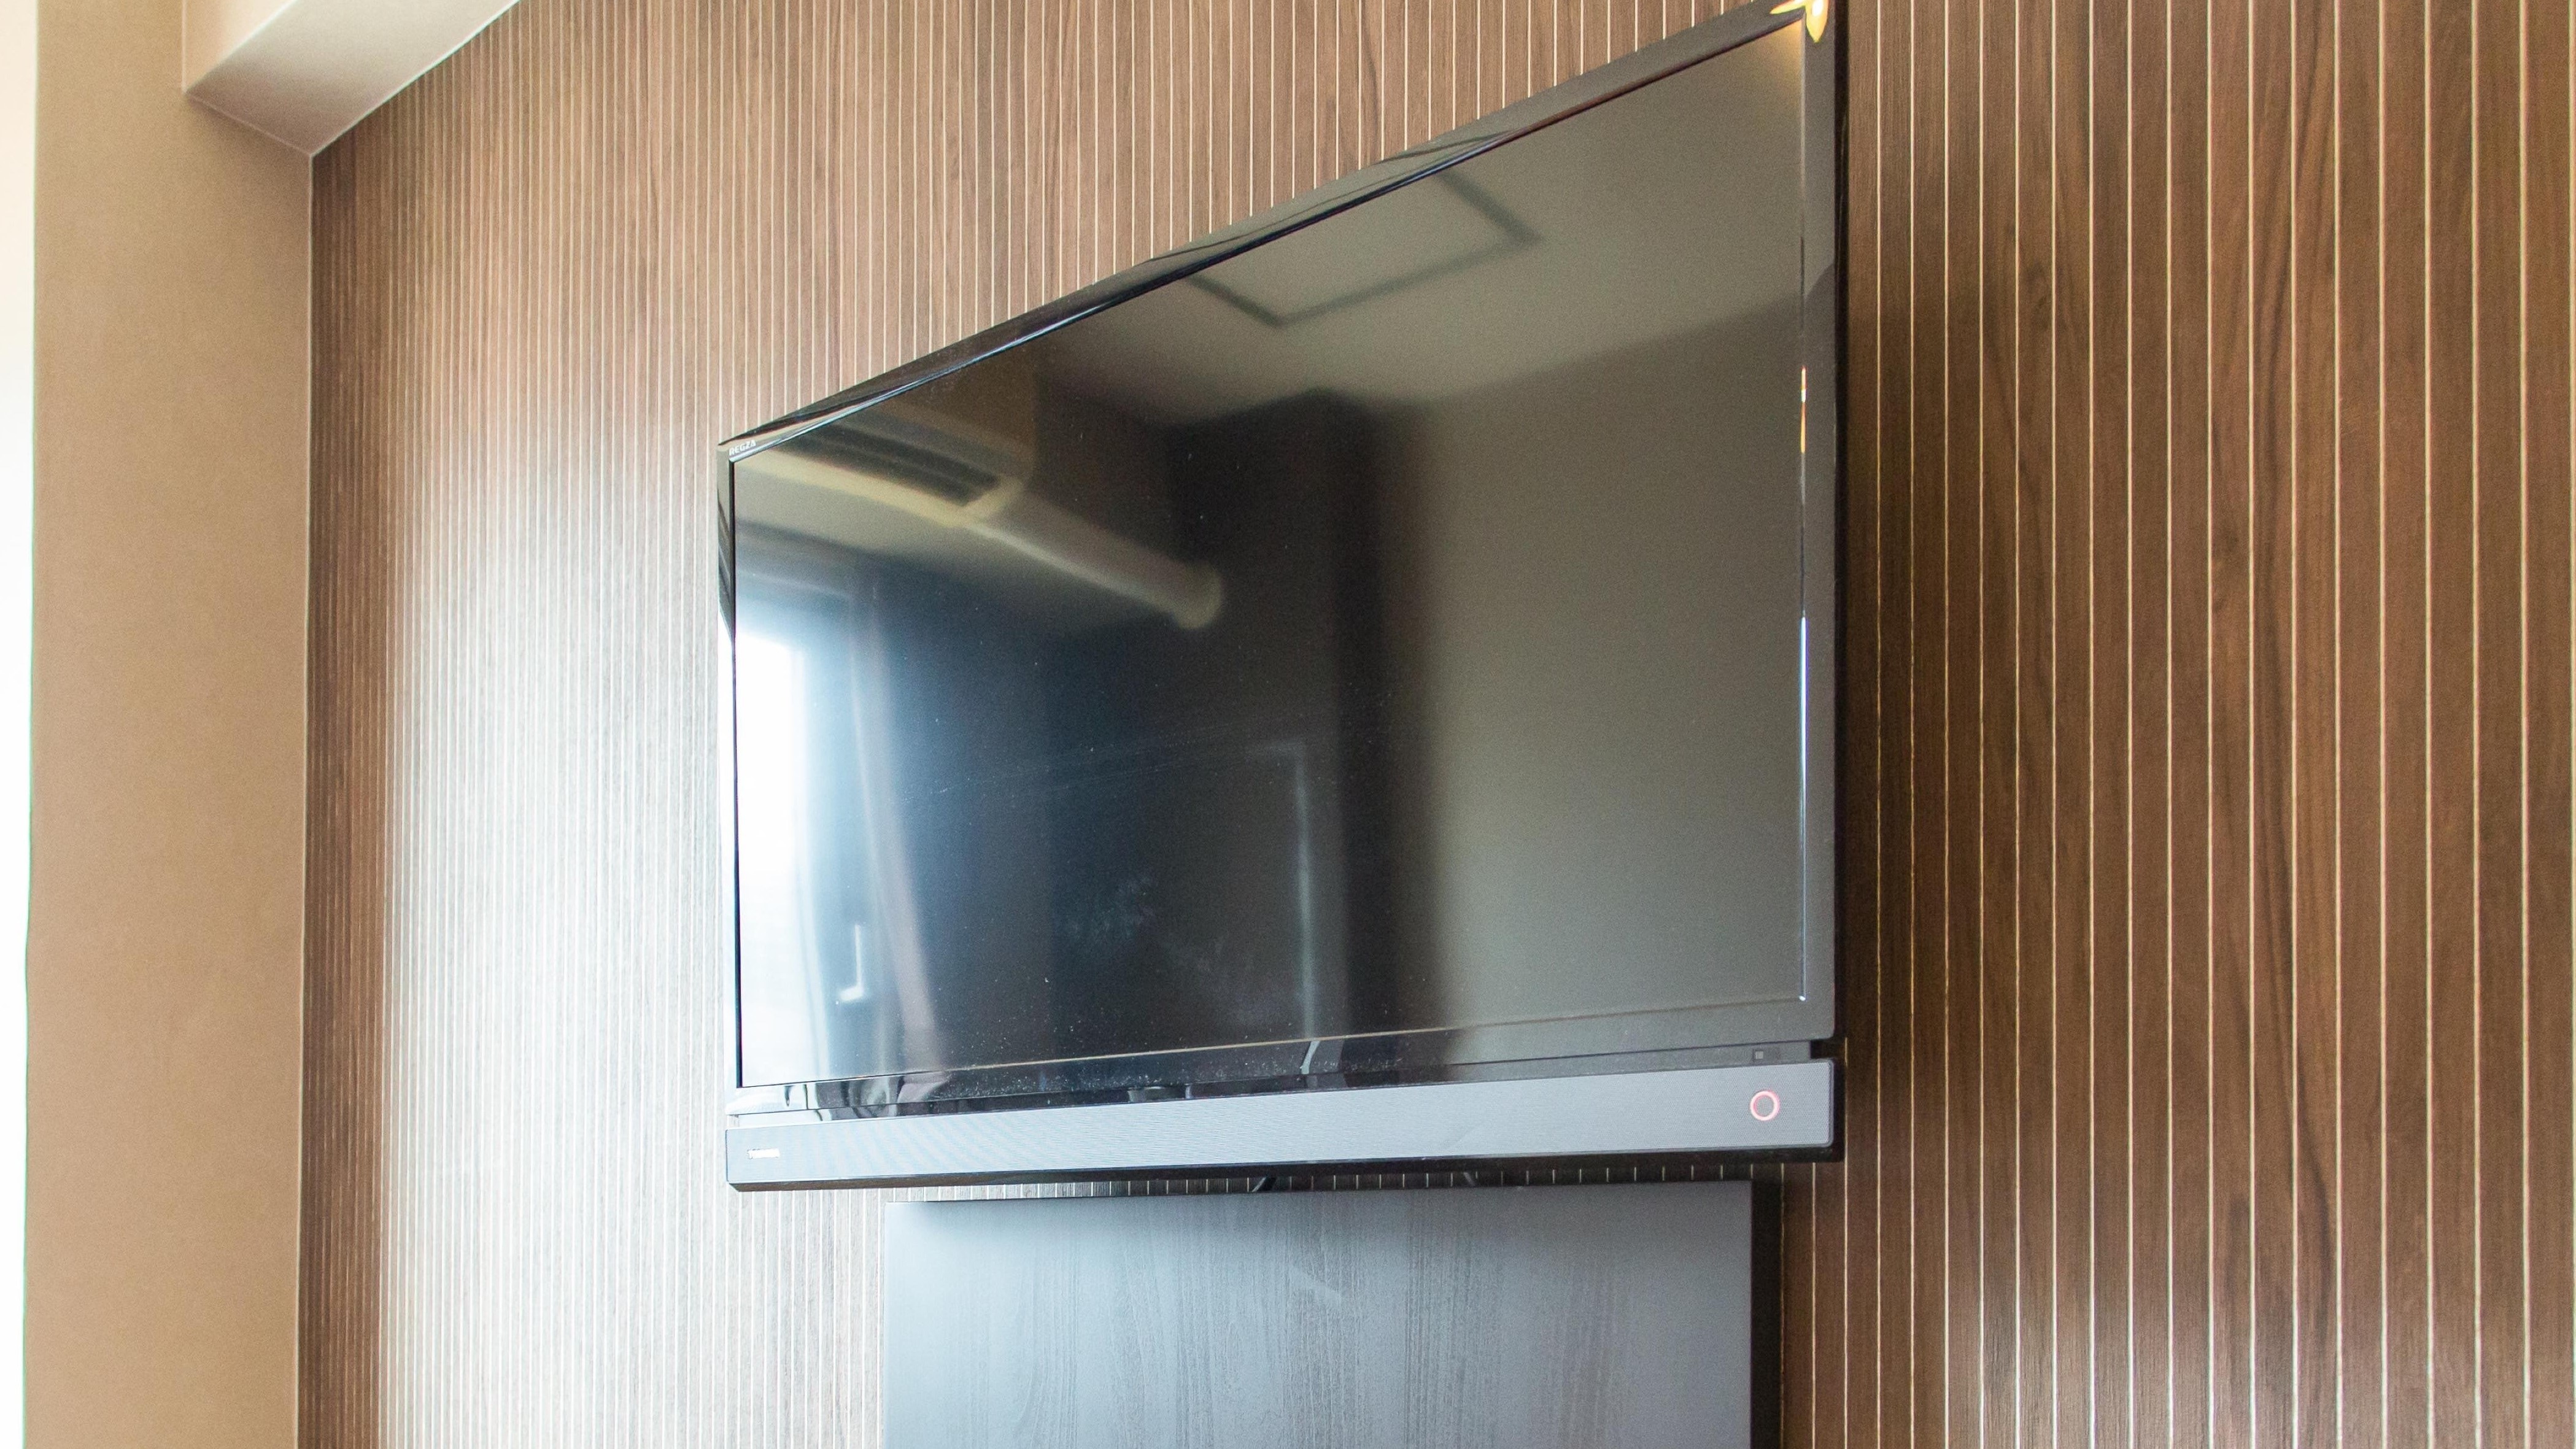 ■ Guest room TV 32 inches ■